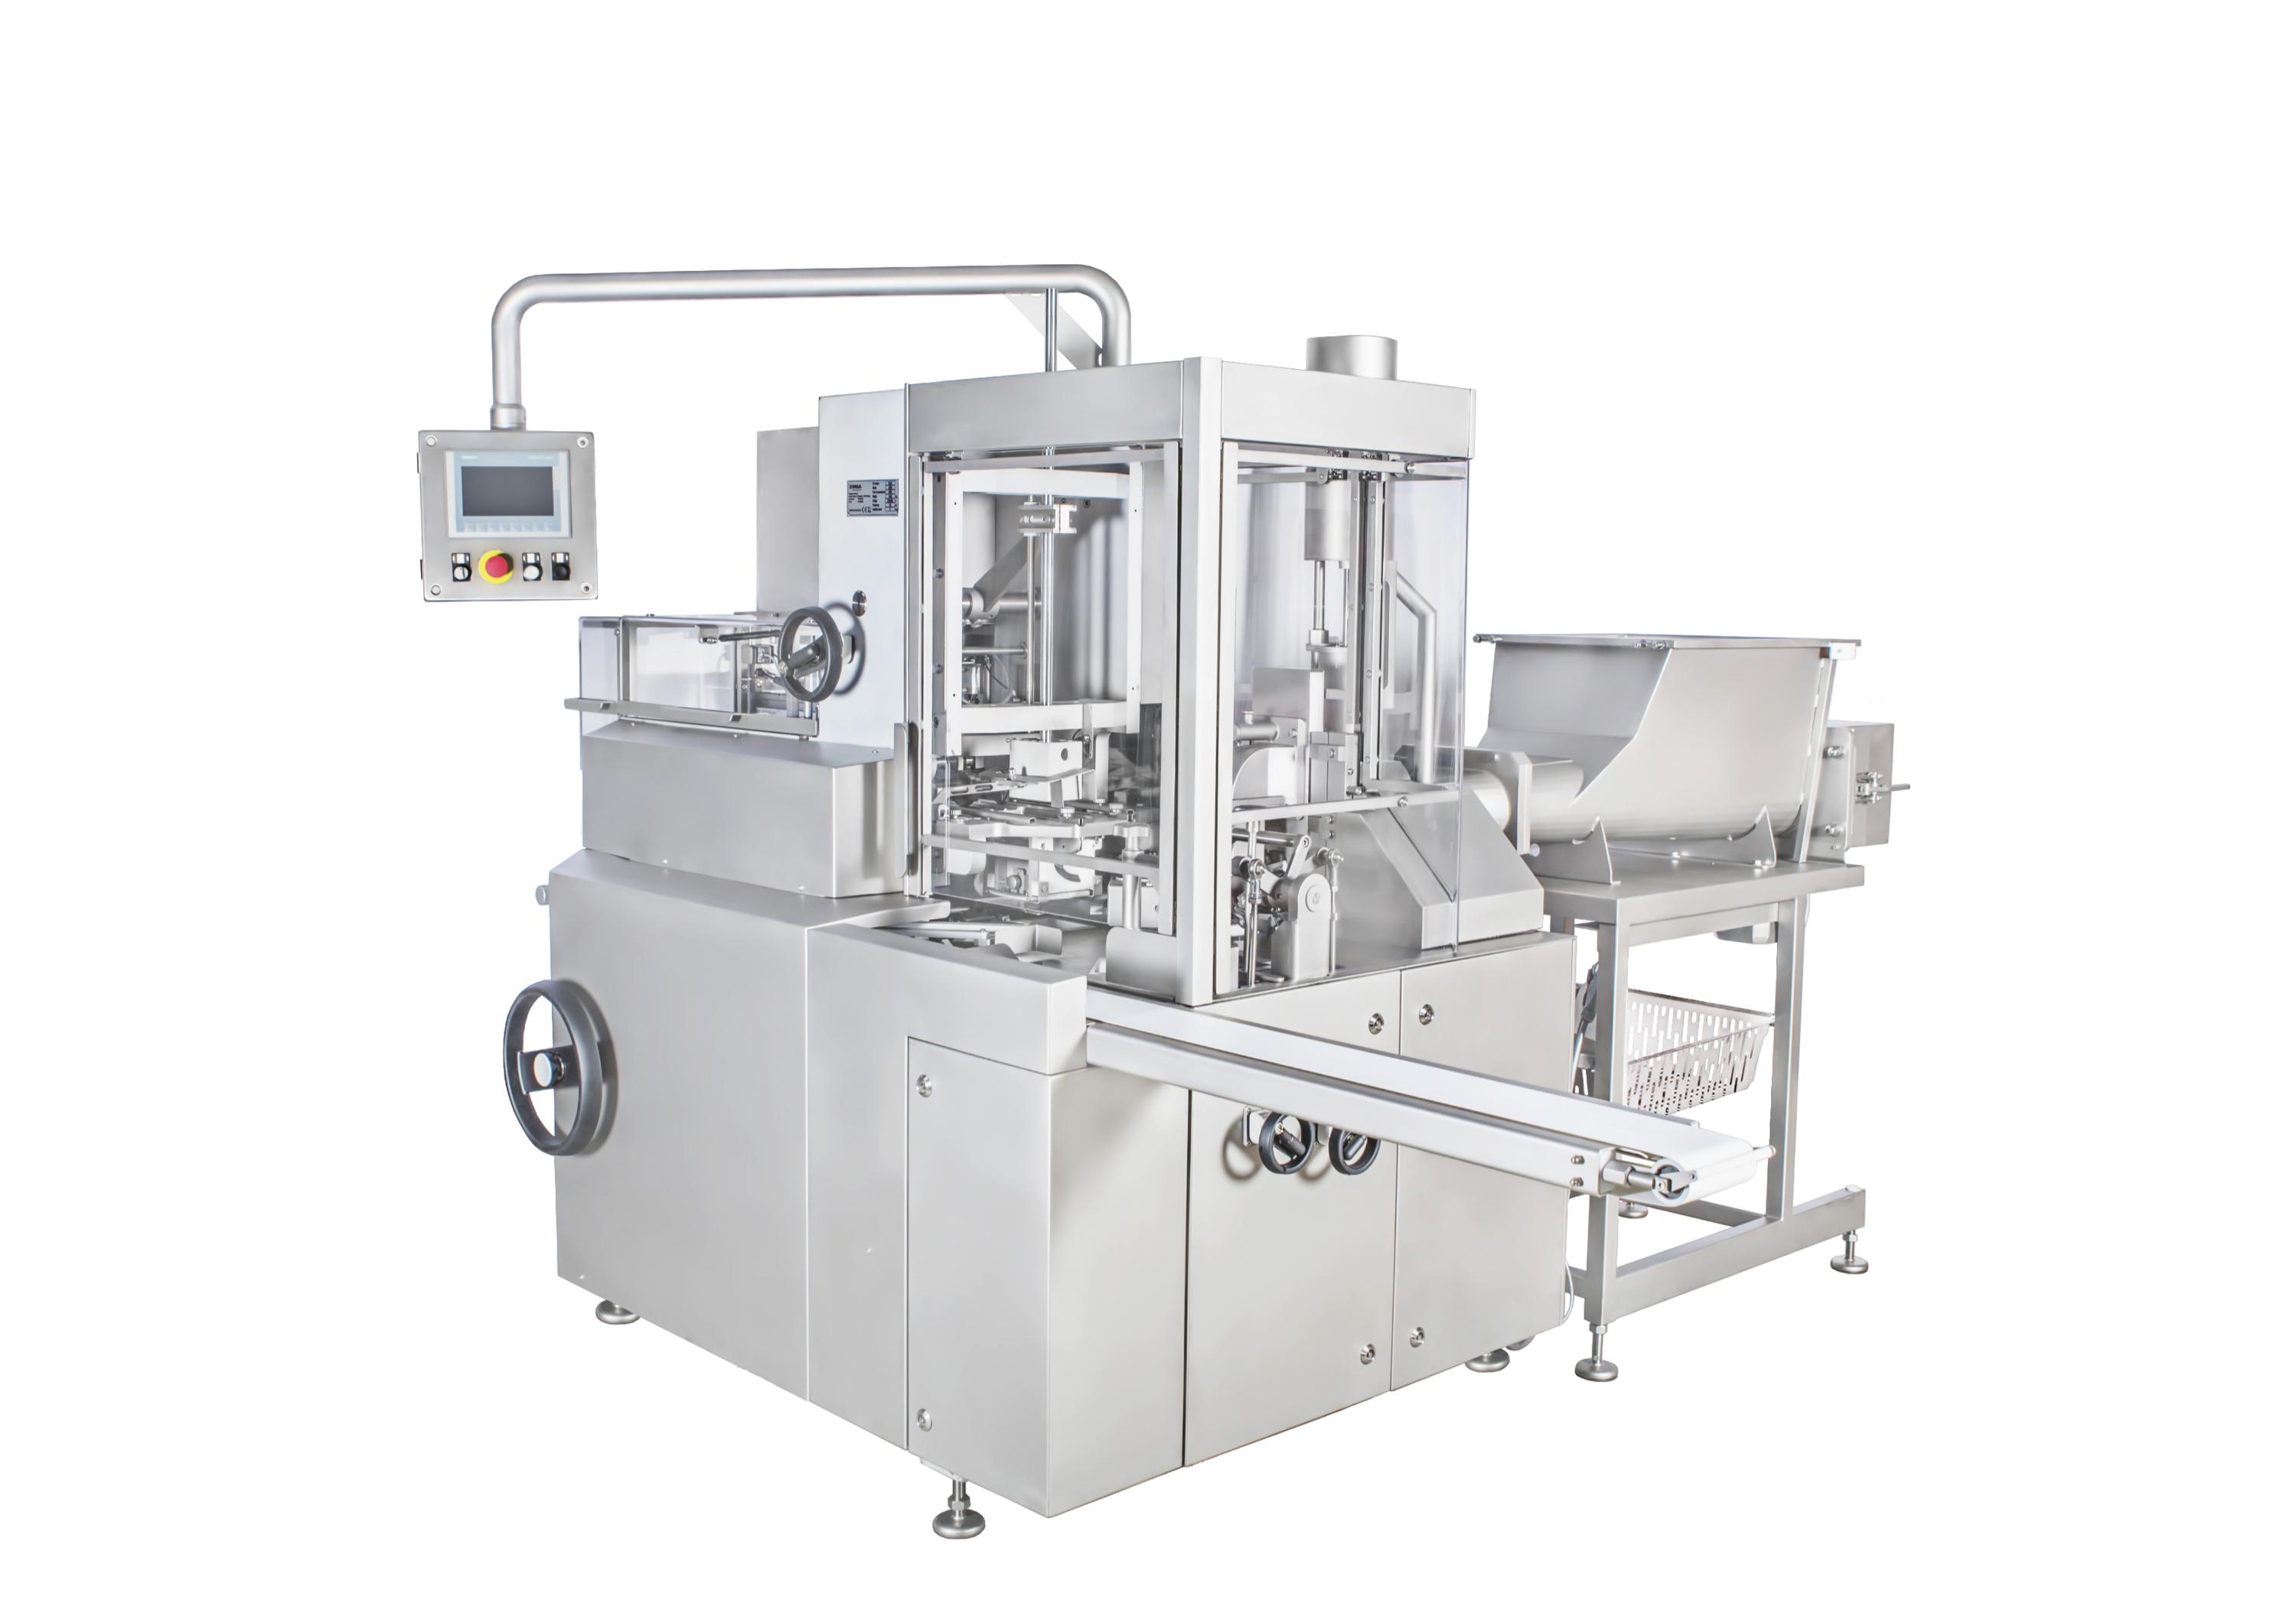 ARM-B2/B3 - BUTTER FILLING AND WRAPPING MACHINE